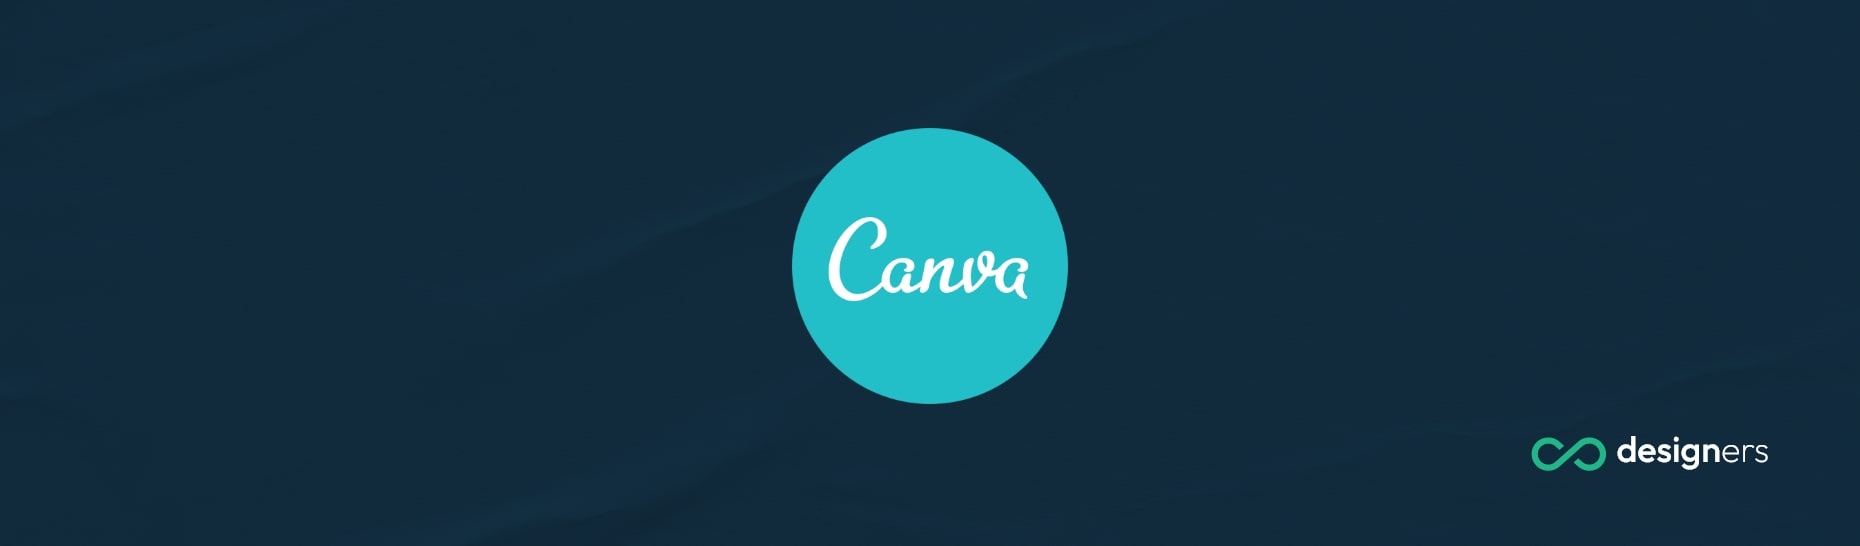 How Do I Outline an Image in Canva?